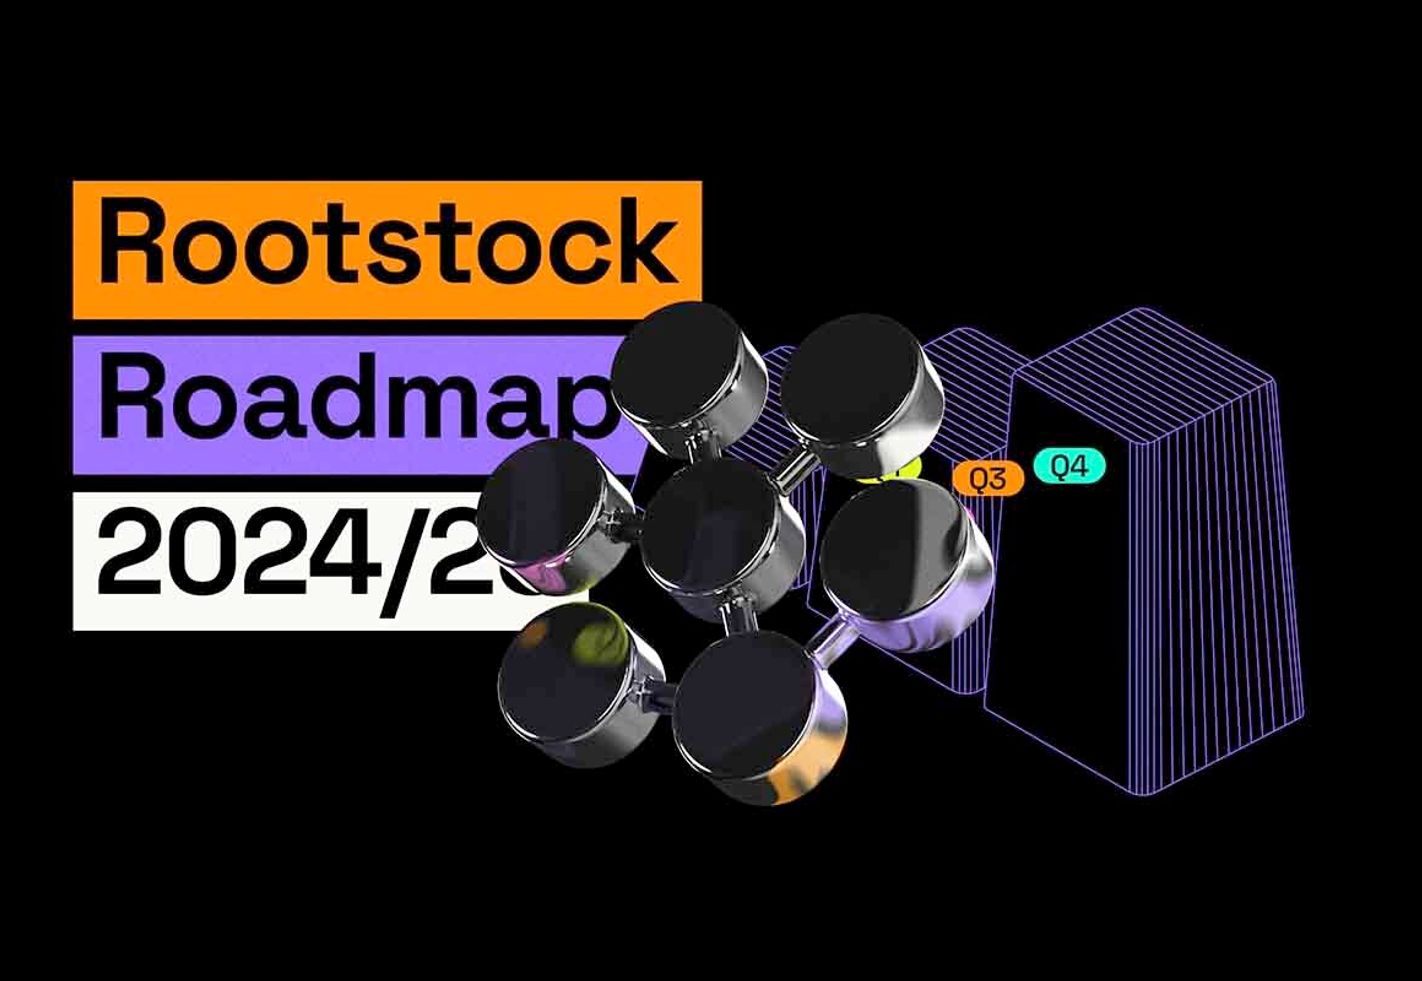 Introducing The Rootstock Roadmap: 2024/25